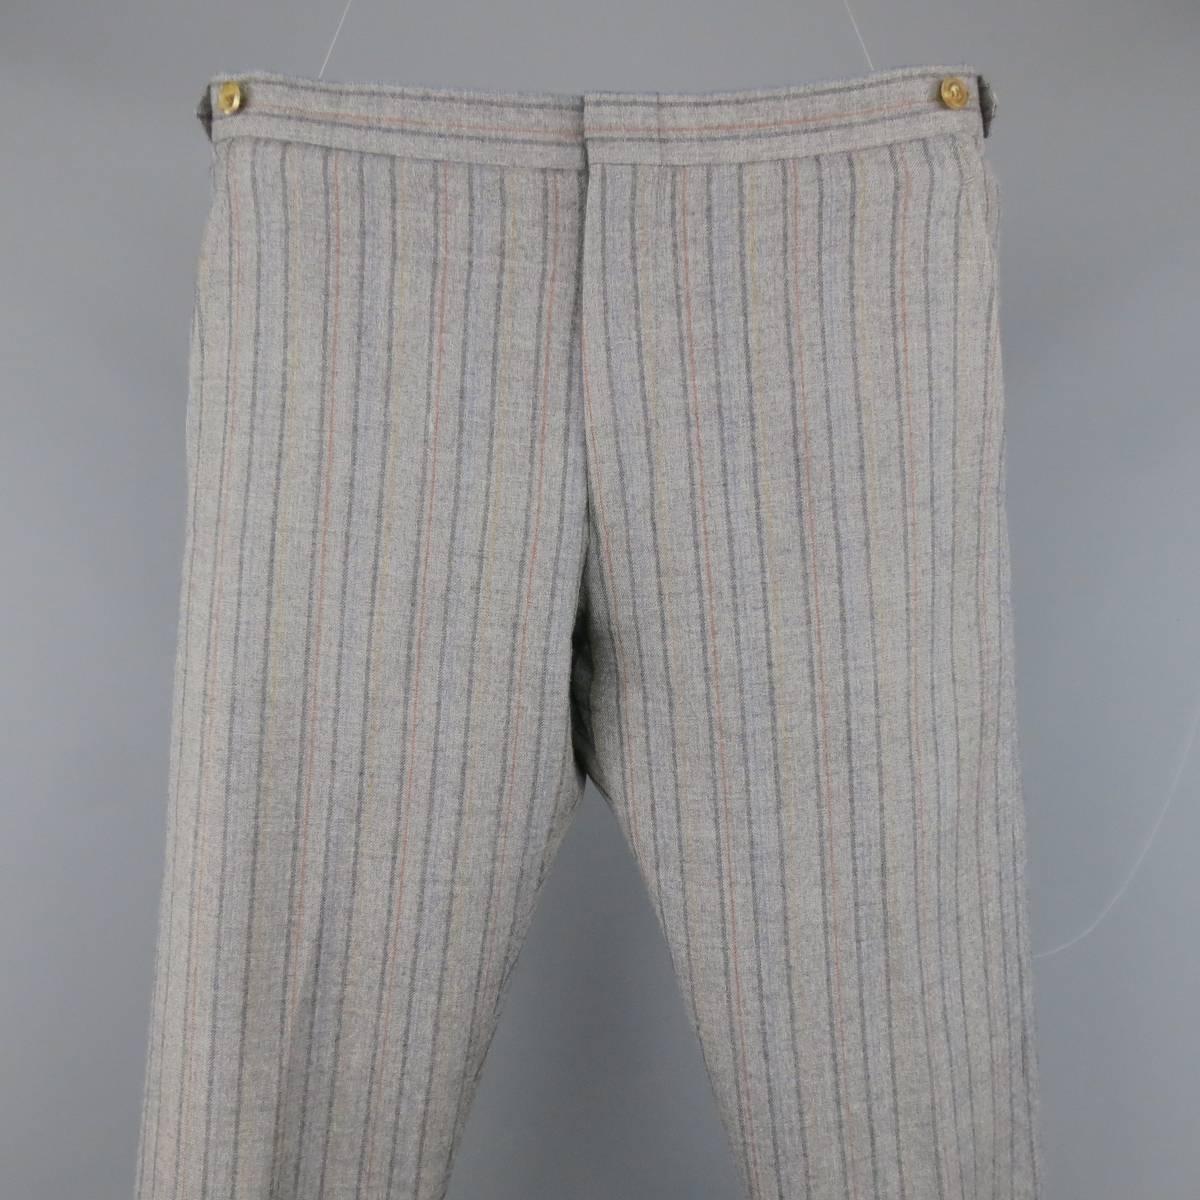 COMME DES GARCONS Causal Pants consists of wool material in a grey color tone. Designed in a zip-fly, clasp closure with inseam side pockets. Detailed in a subtle
multi-color stripe pattern. Relaxed leg and adjustable side tabs. Made in Japan.
